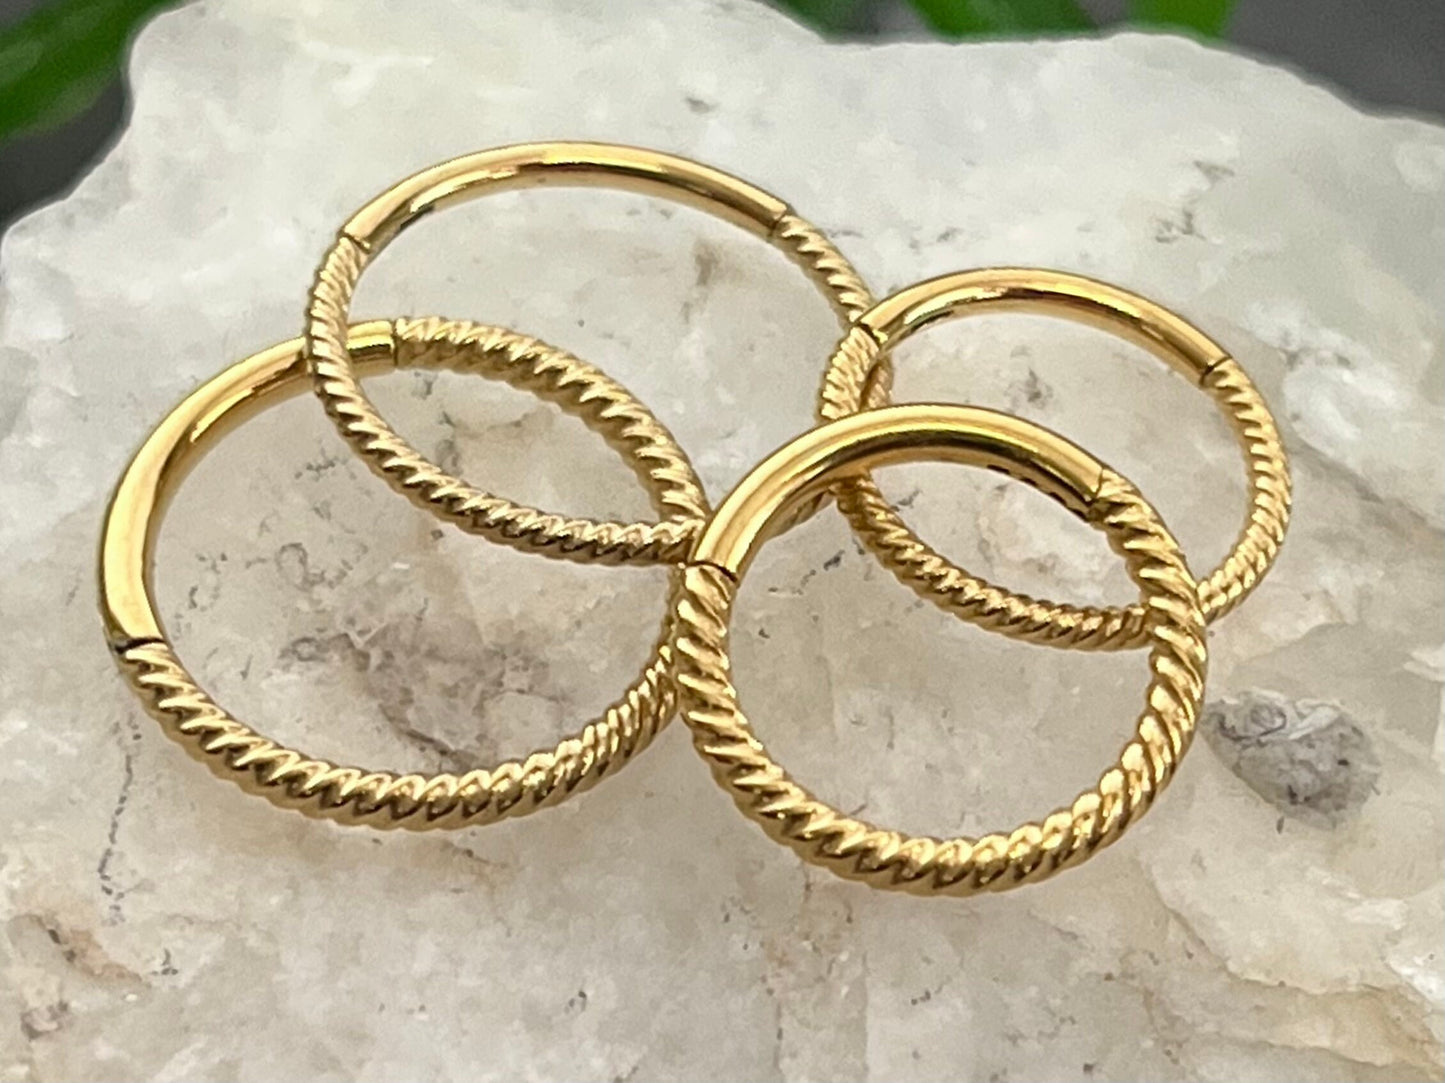 1 Piece Stainless Steel Braided Hinged Segment Septum Ring - 18g & 16g, 8mm or 10mm - Steel, Black, Gold, Rose Gold, and Rainbow available!